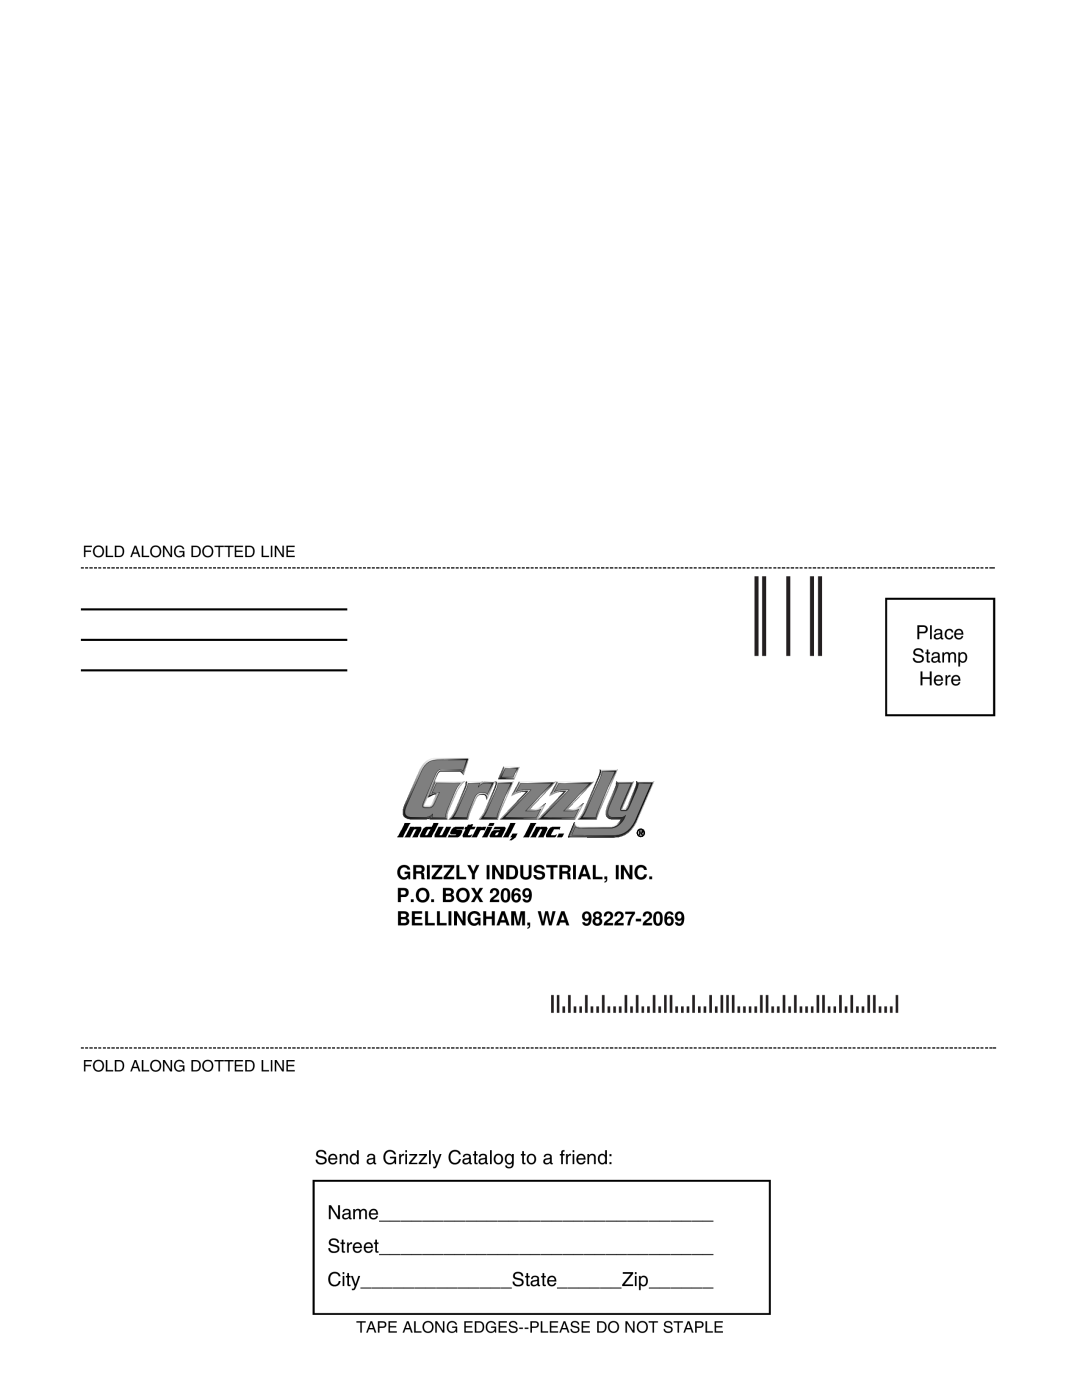 Grizzly G7212, G7211 instruction manual Place Stamp Here, Grizzly Industrial, Inc P.O. Box Bellingham, Wa 